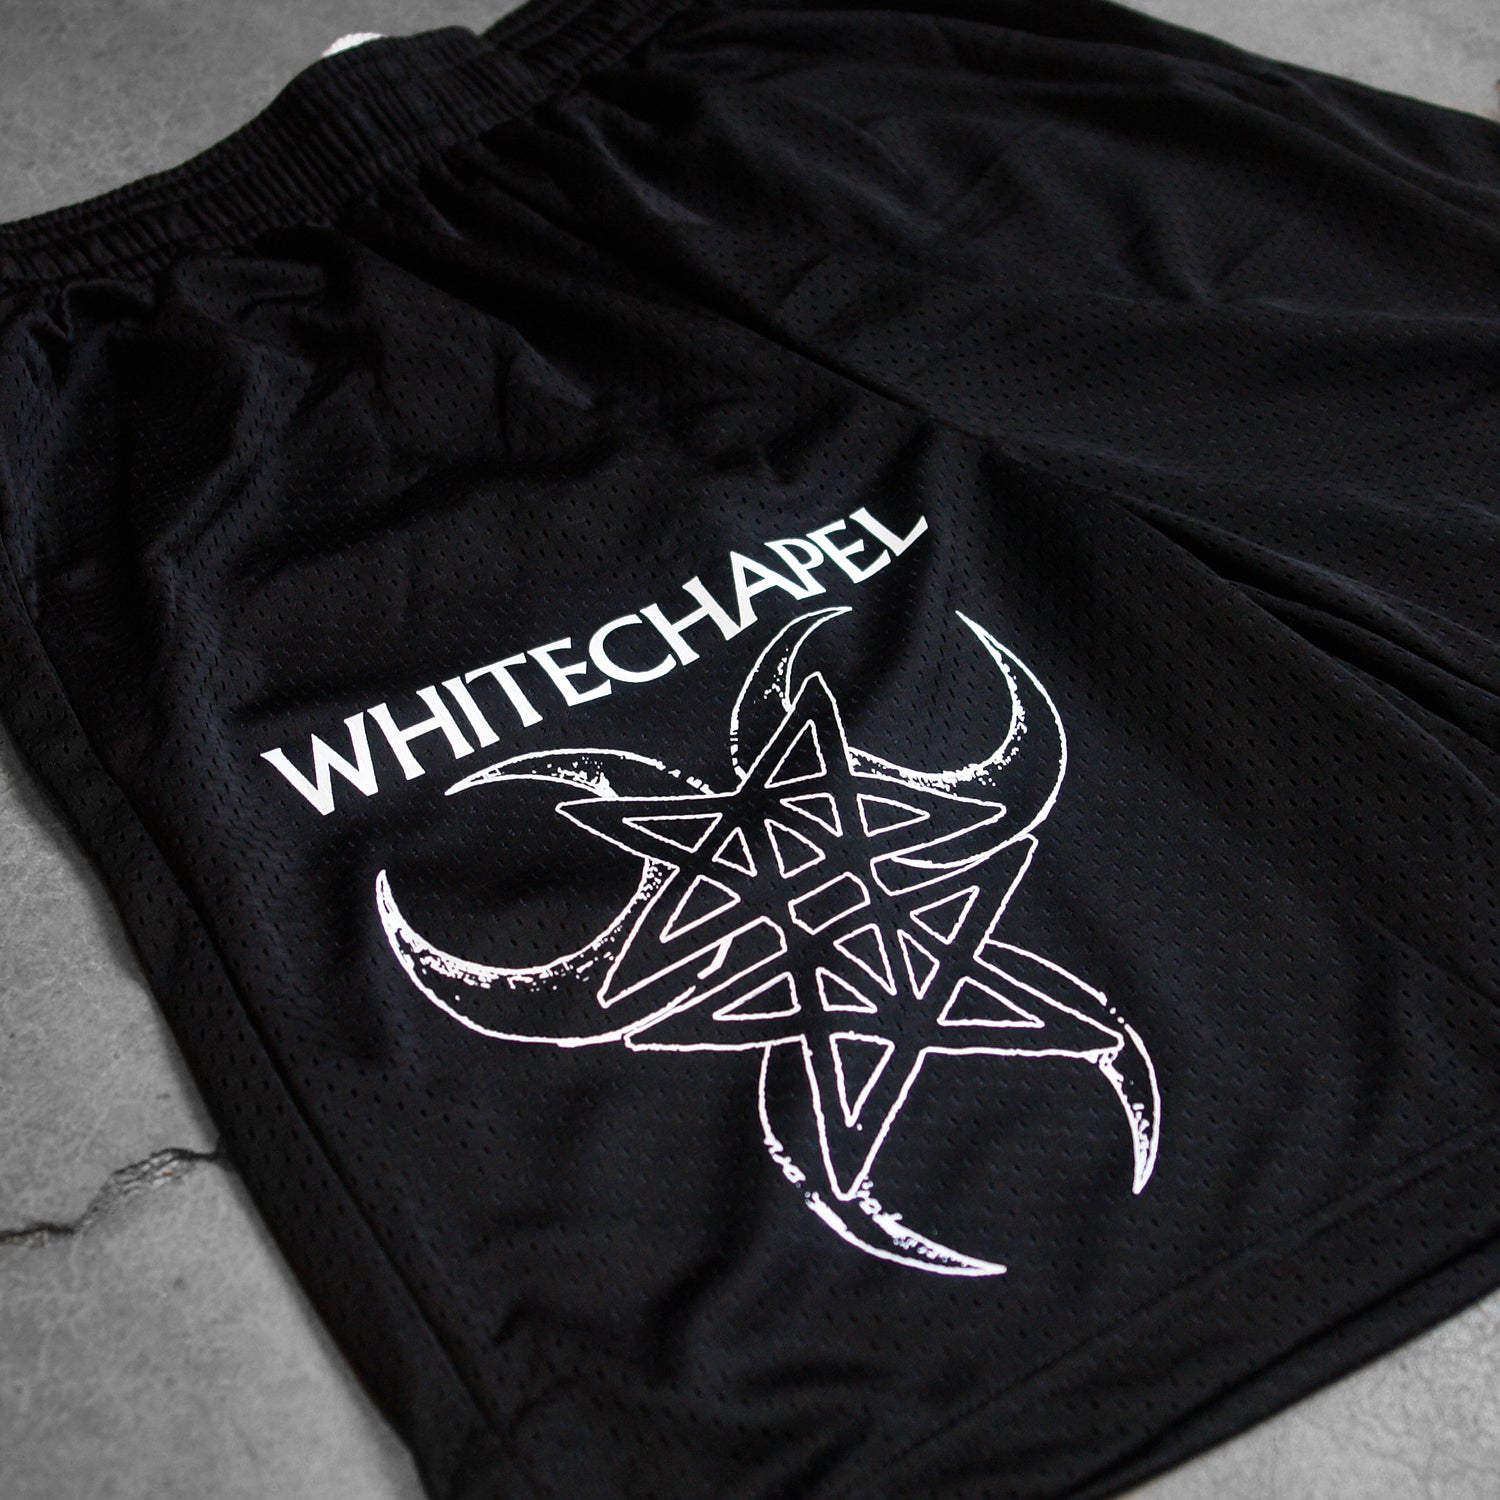 close up Image of black athletic shorts against a grey concrete background. The right bottom of the leg of the shorts says "whitechapel" across the leg in white text. Below that is a graphic of three cresent moons outlined in white- one facing the left, one the right, and one straight down. In the center of that is a double pentagram- two stars mirroring and slightly overlapping each other, also in white. 